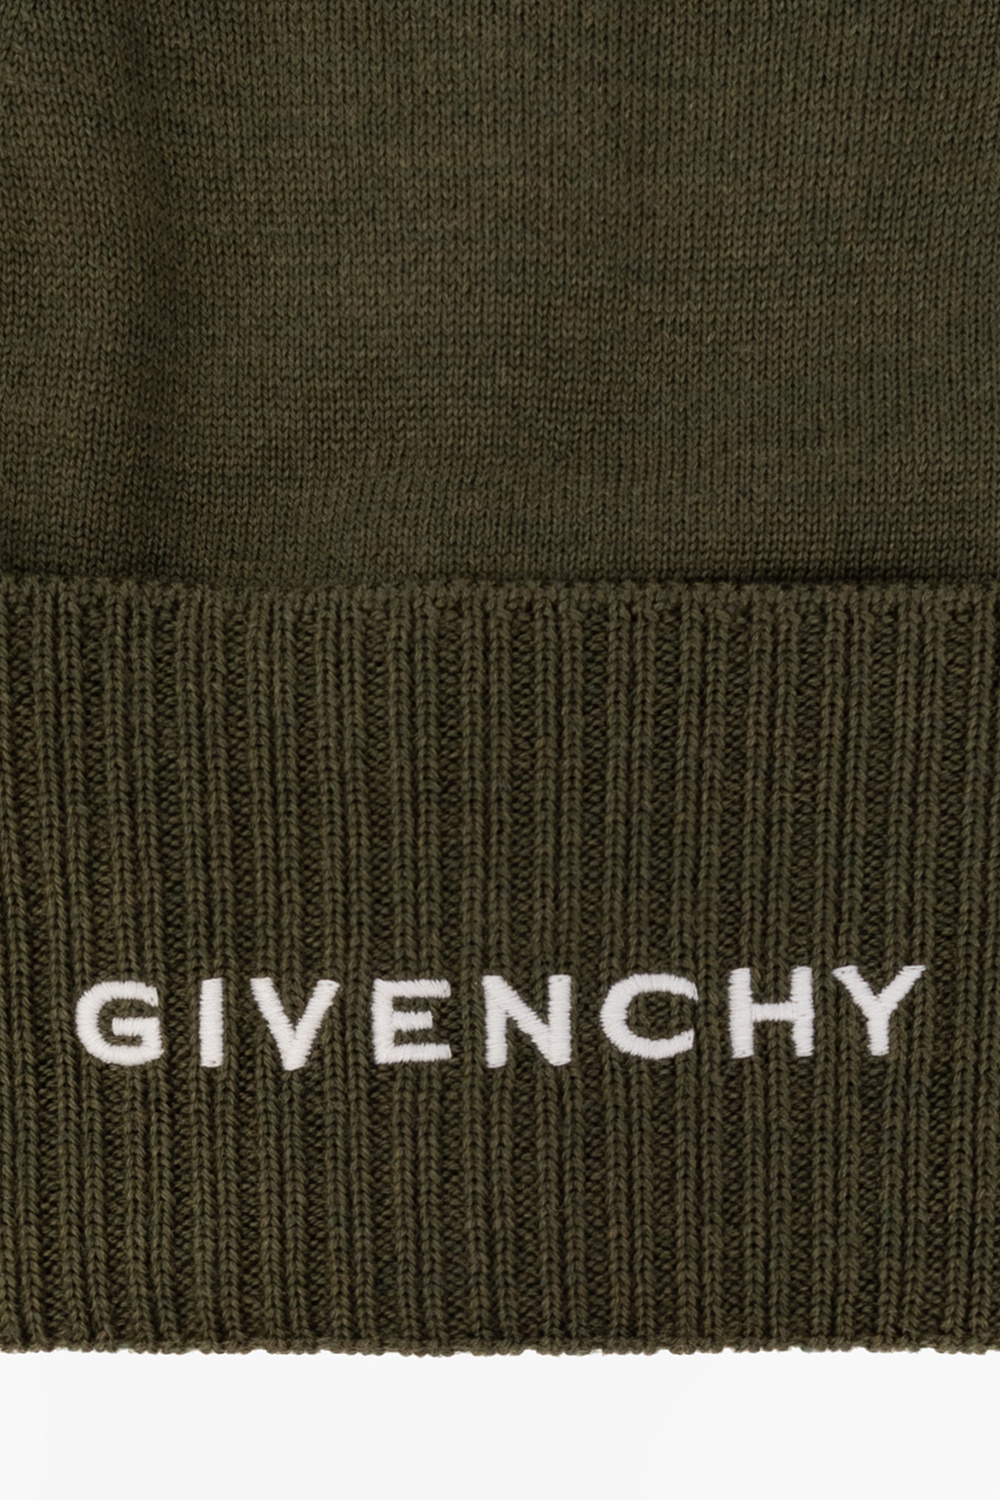 Givenchy Парфюмированая вода absolutely irresistible givenchy 30 мл